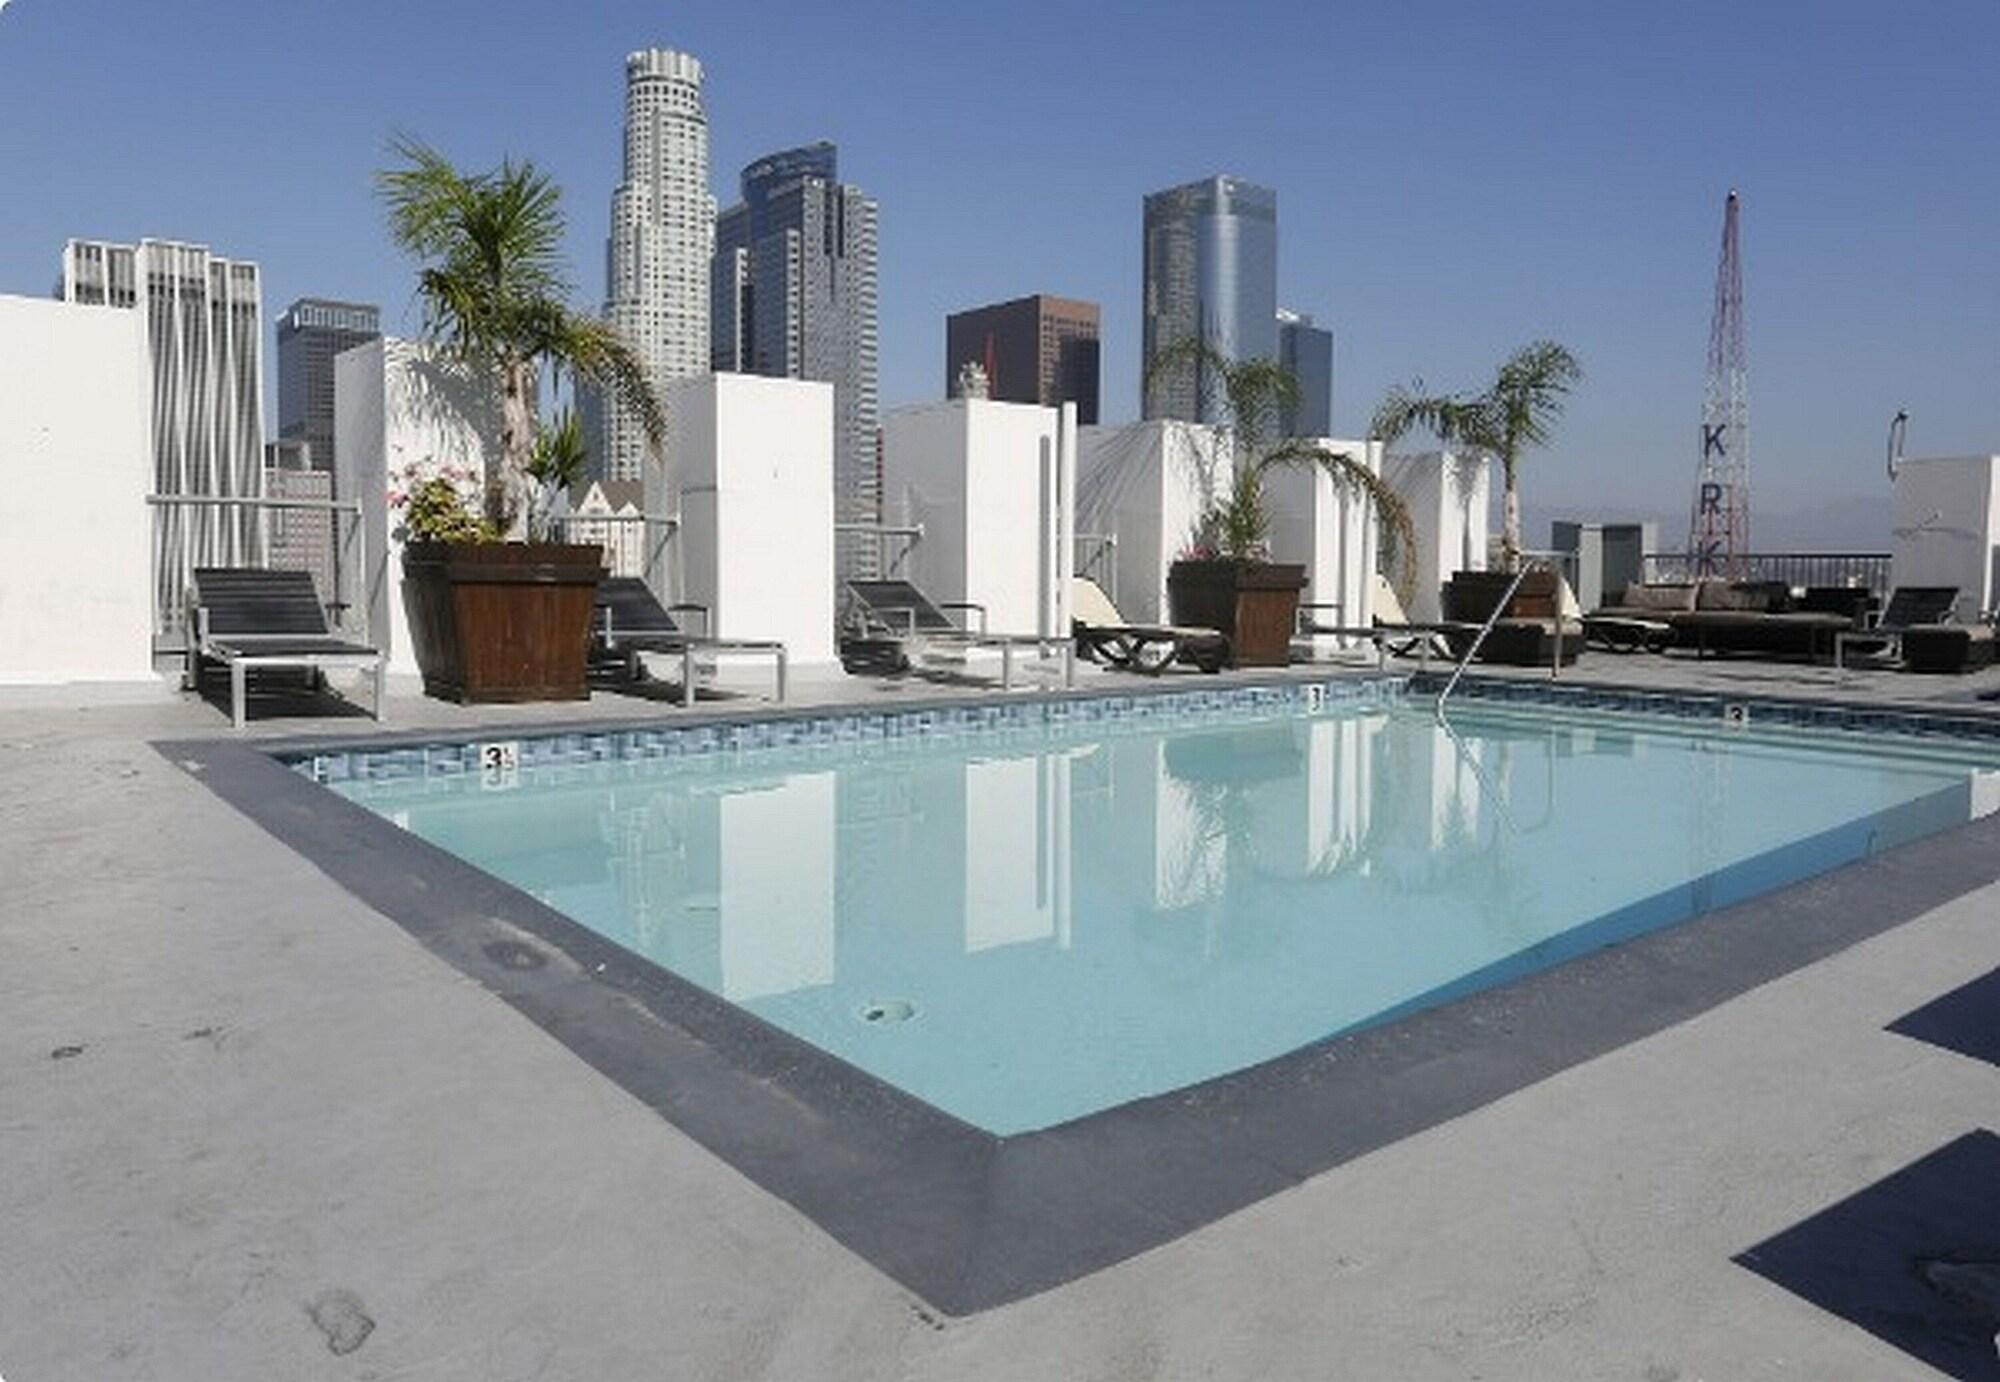 Pool view Historic Lofts and Homes in DTLA